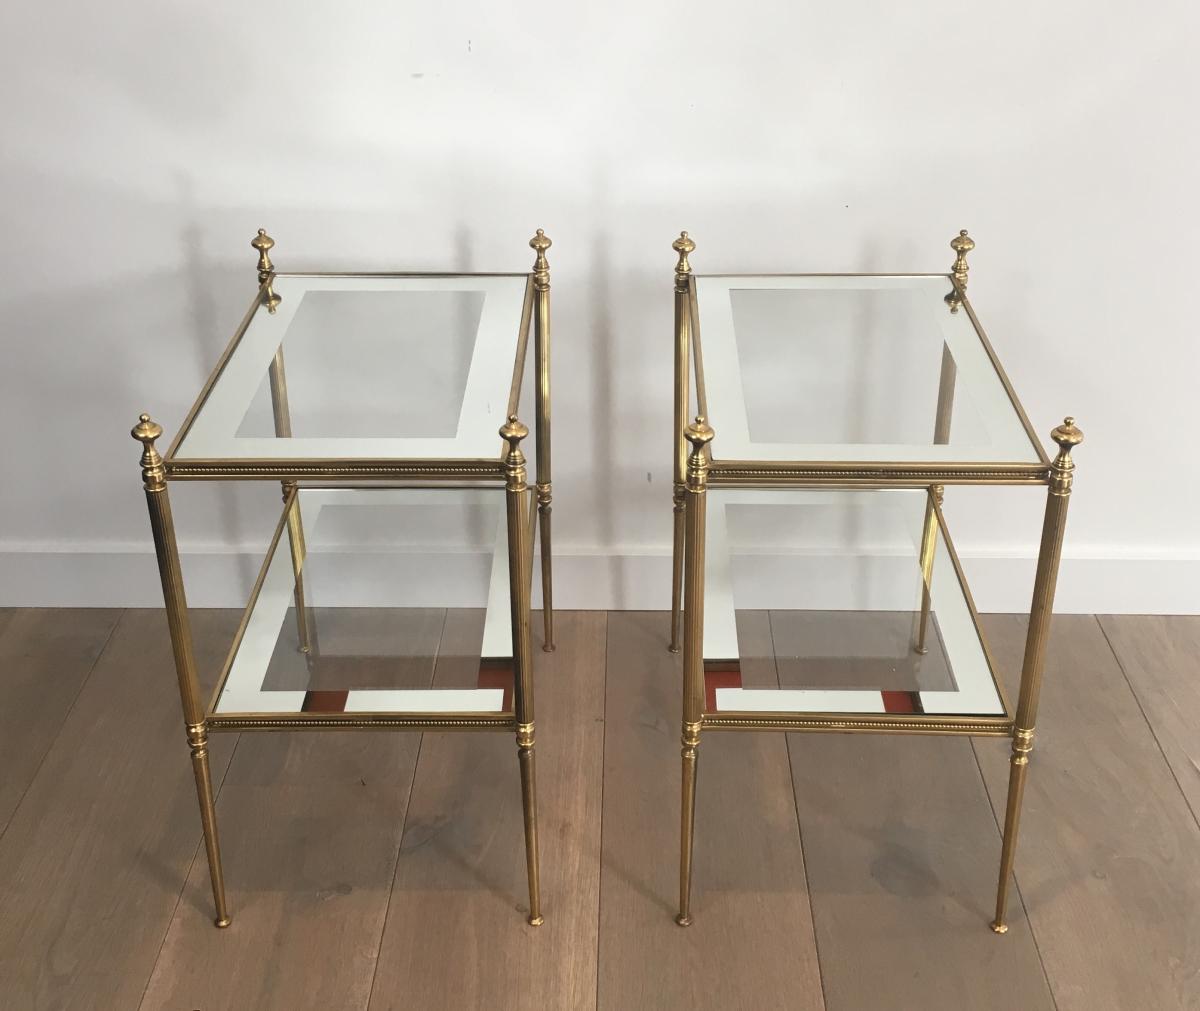 Pair Of Brass Sofa Tips And Glazed Glass Tiles With Silver Trim.-photo-3